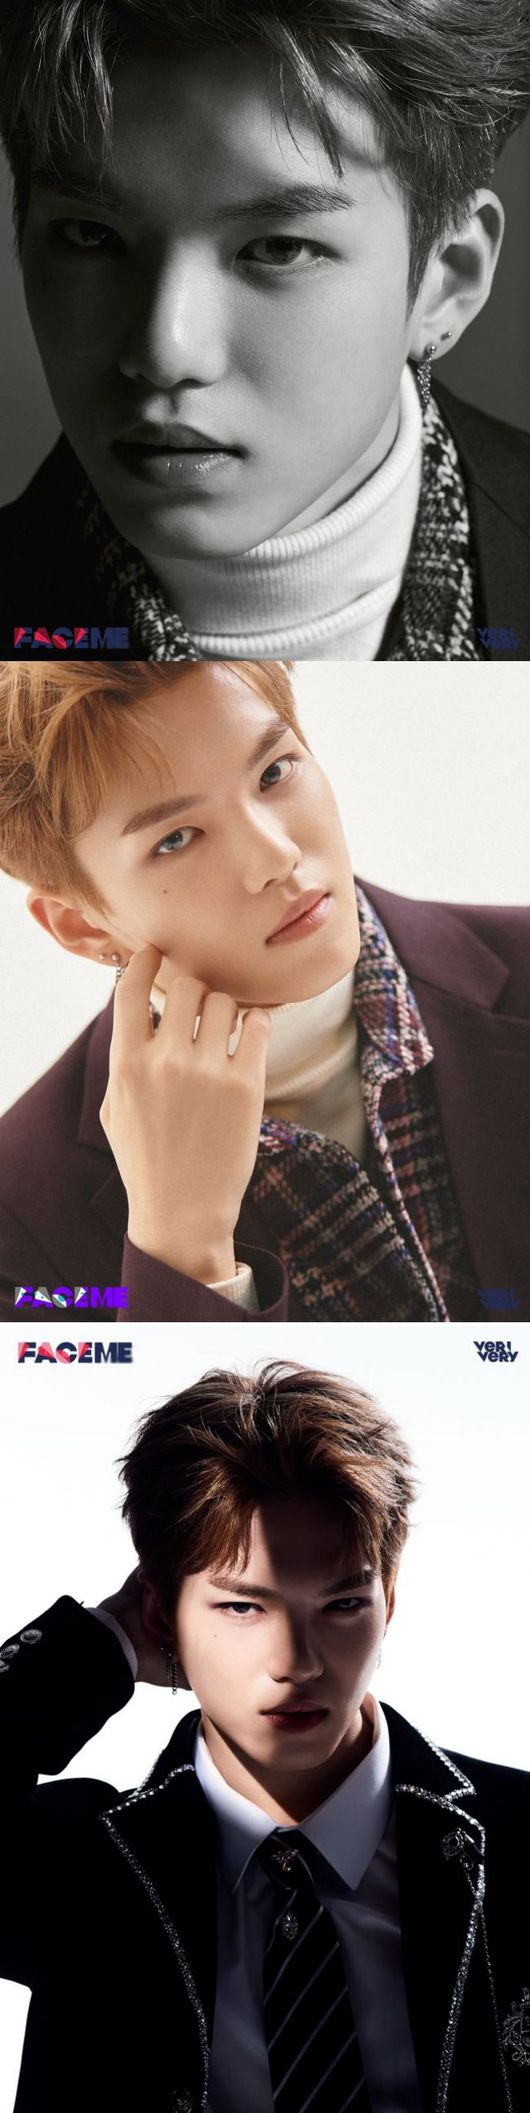 The personal character video and official photo of the boy group Verivery member Gyehyun were released.From 0:00 on the 19th, Verivery official SNS channel continued to show the fans attention by releasing the fourth member, Gyehyuns personal character video and official photo sequentially.In the first released character video, it starts with a look of a gaehyeon walking somewhere wearing a green color check suit.Then, a chic look that I could not see before or dance in the mirror fills the screen and attracts attention.Especially in the official photo, Gyehyun caught the Sight at once with visuals with intense eyes.With a cold expression and charismatic Sight treatment, he showed a deadly charm and raised his curiosity about his new album FACE ME.Veriverys third mini album FACE ME, which announced a comeback on the 7th of next month, has an infinite possibility, but it contains the process of admitting and loving oneself to the hurt youth in the alienation and disconnection.Verivery, which has been loved by fans with various concepts and high-quality music for each album, is interested in what the new album will look like.Verivery will release its third mini album FACE ME on January 7th and will start full-scale activities.Jellyfish Entertainment